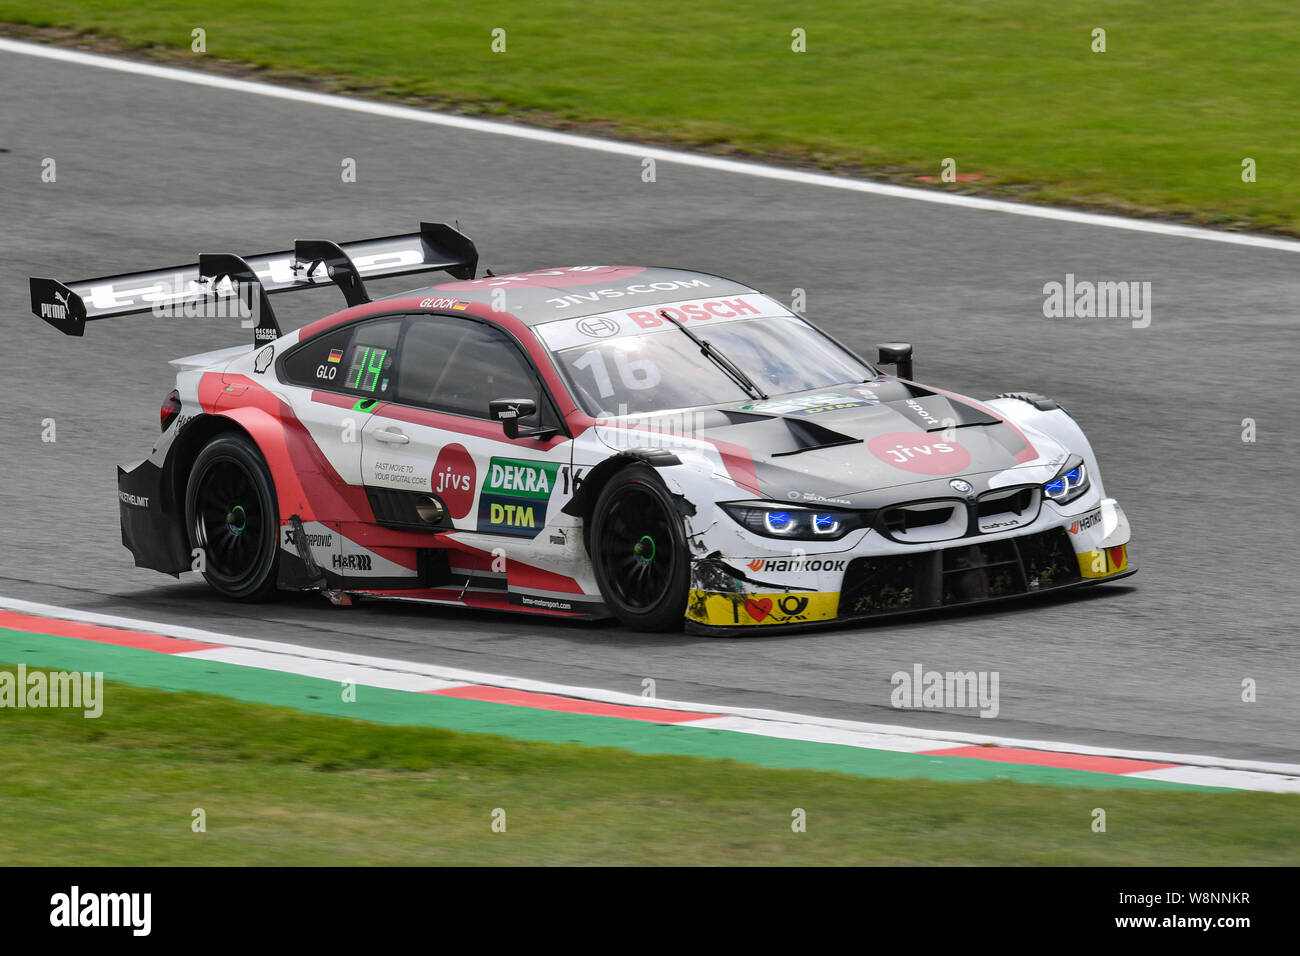 KENT, UNITED KINGDOM. 10th Aug, 2019. Timo Glock (BMW Team RMR) in DTM Race 1 during DTM (German Touring Cars) and W Series at Brands Hatch GP Circuit on Saturday, August 10, 2019 in KENT, ENGLAND. Credit: Taka G Wu/Alamy Live News Stock Photo